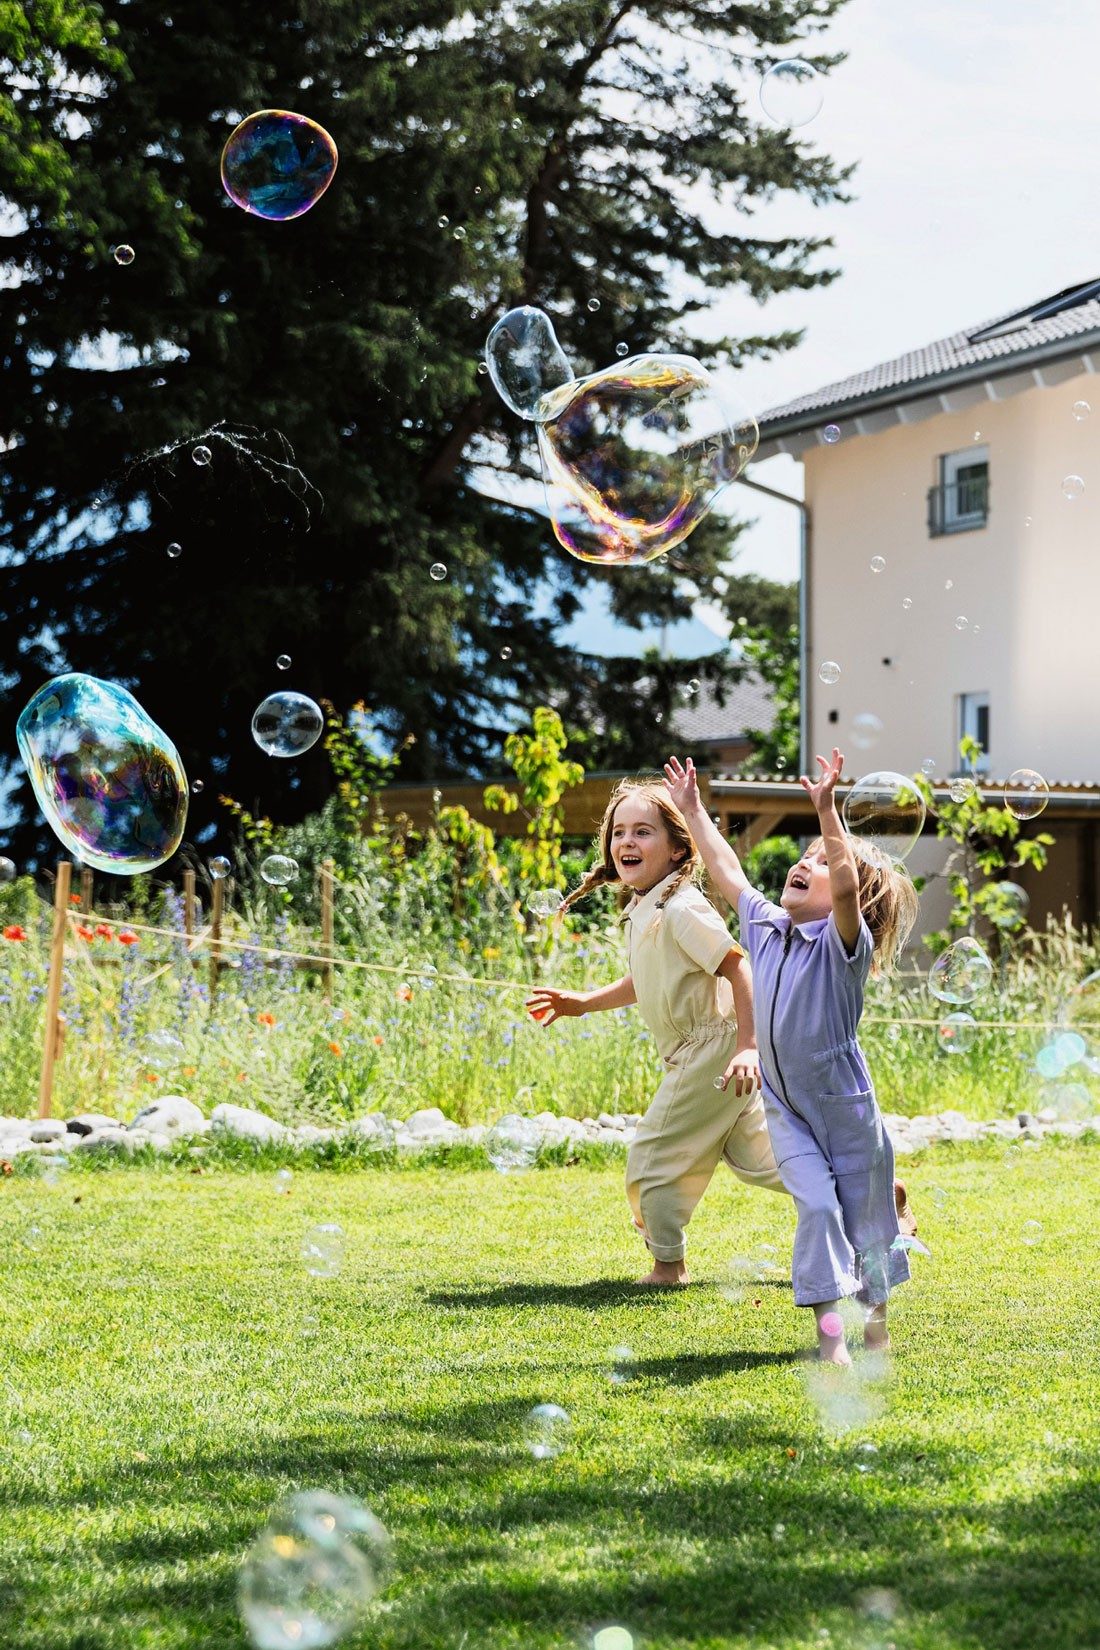 Two children play with bubbles in a garden.